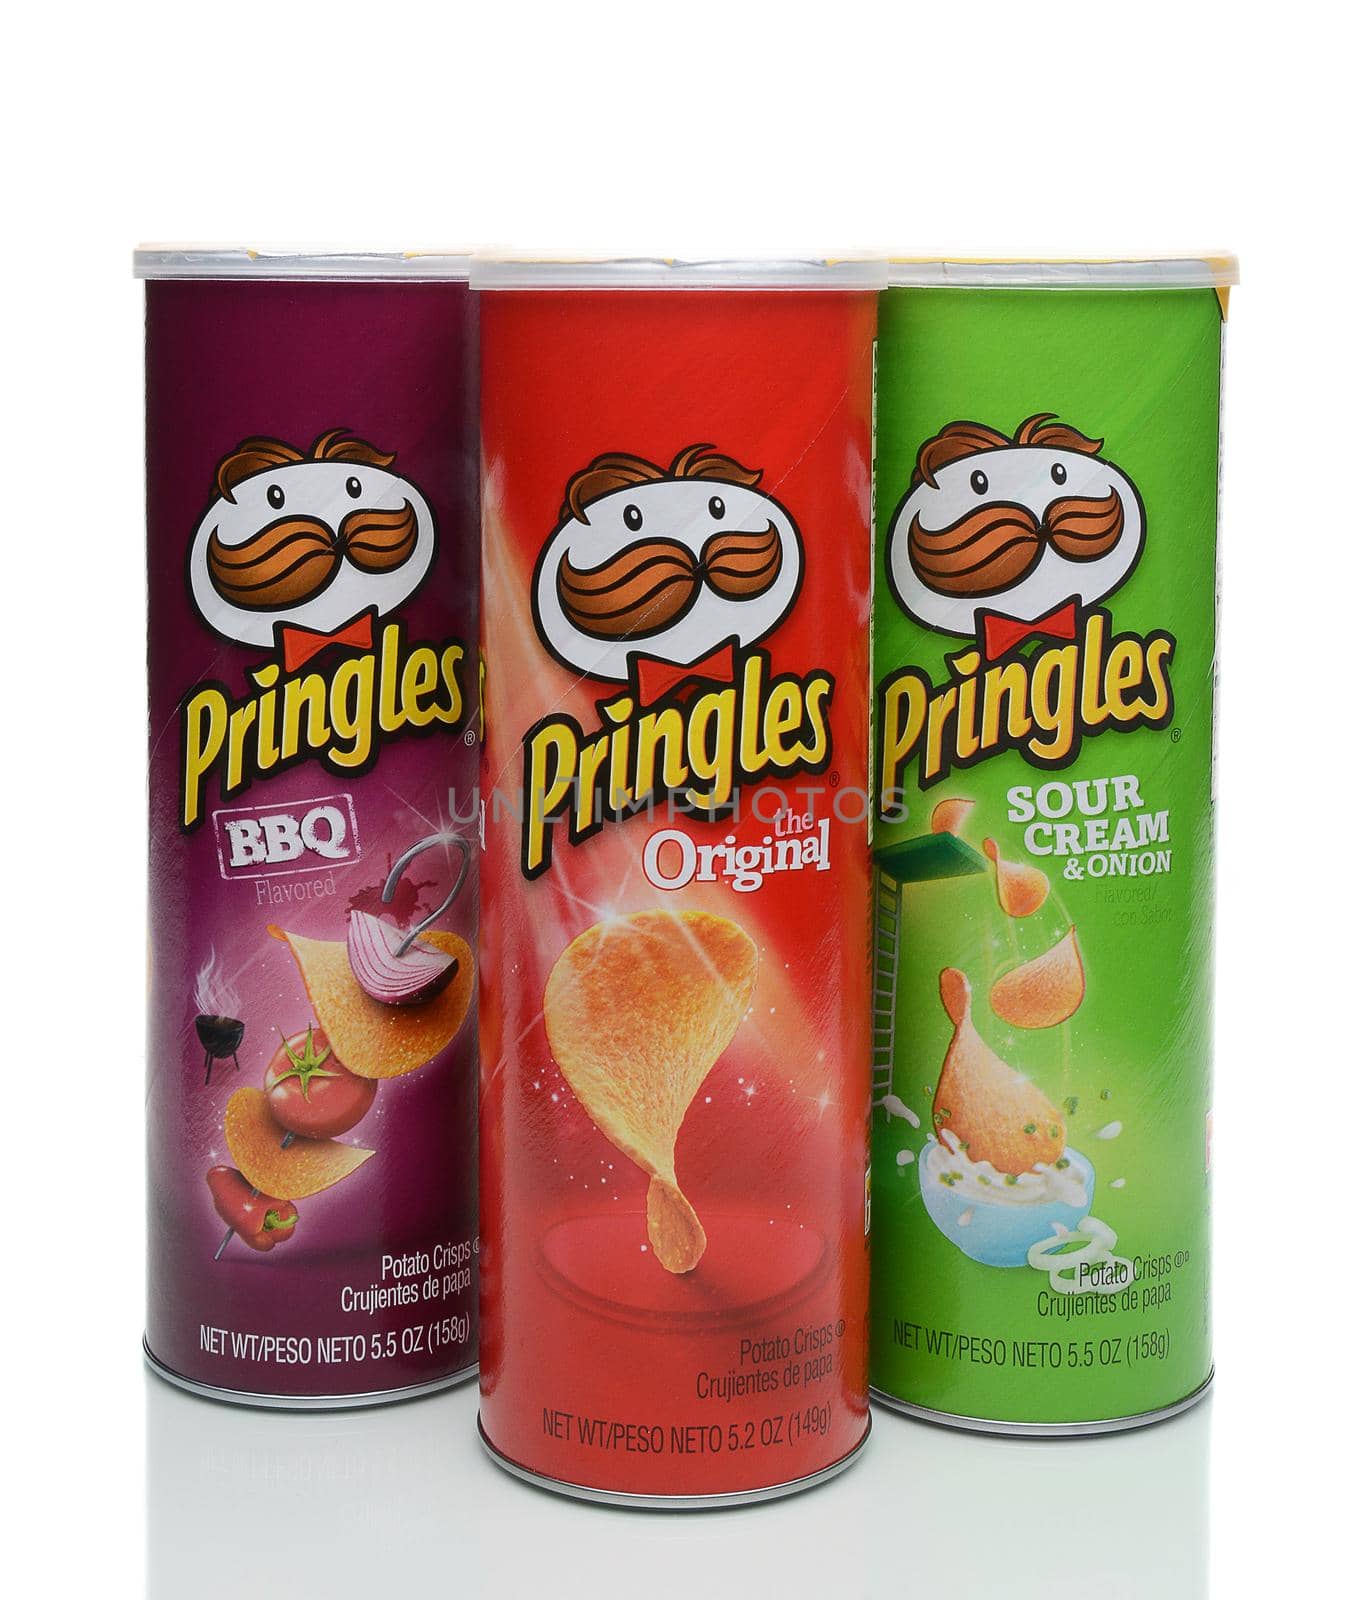 IRVINE, CA - JANUARY 4, 2018: Three Pringles Cans. Pringles ia a brand of potato and wheat based stackable snack chips 